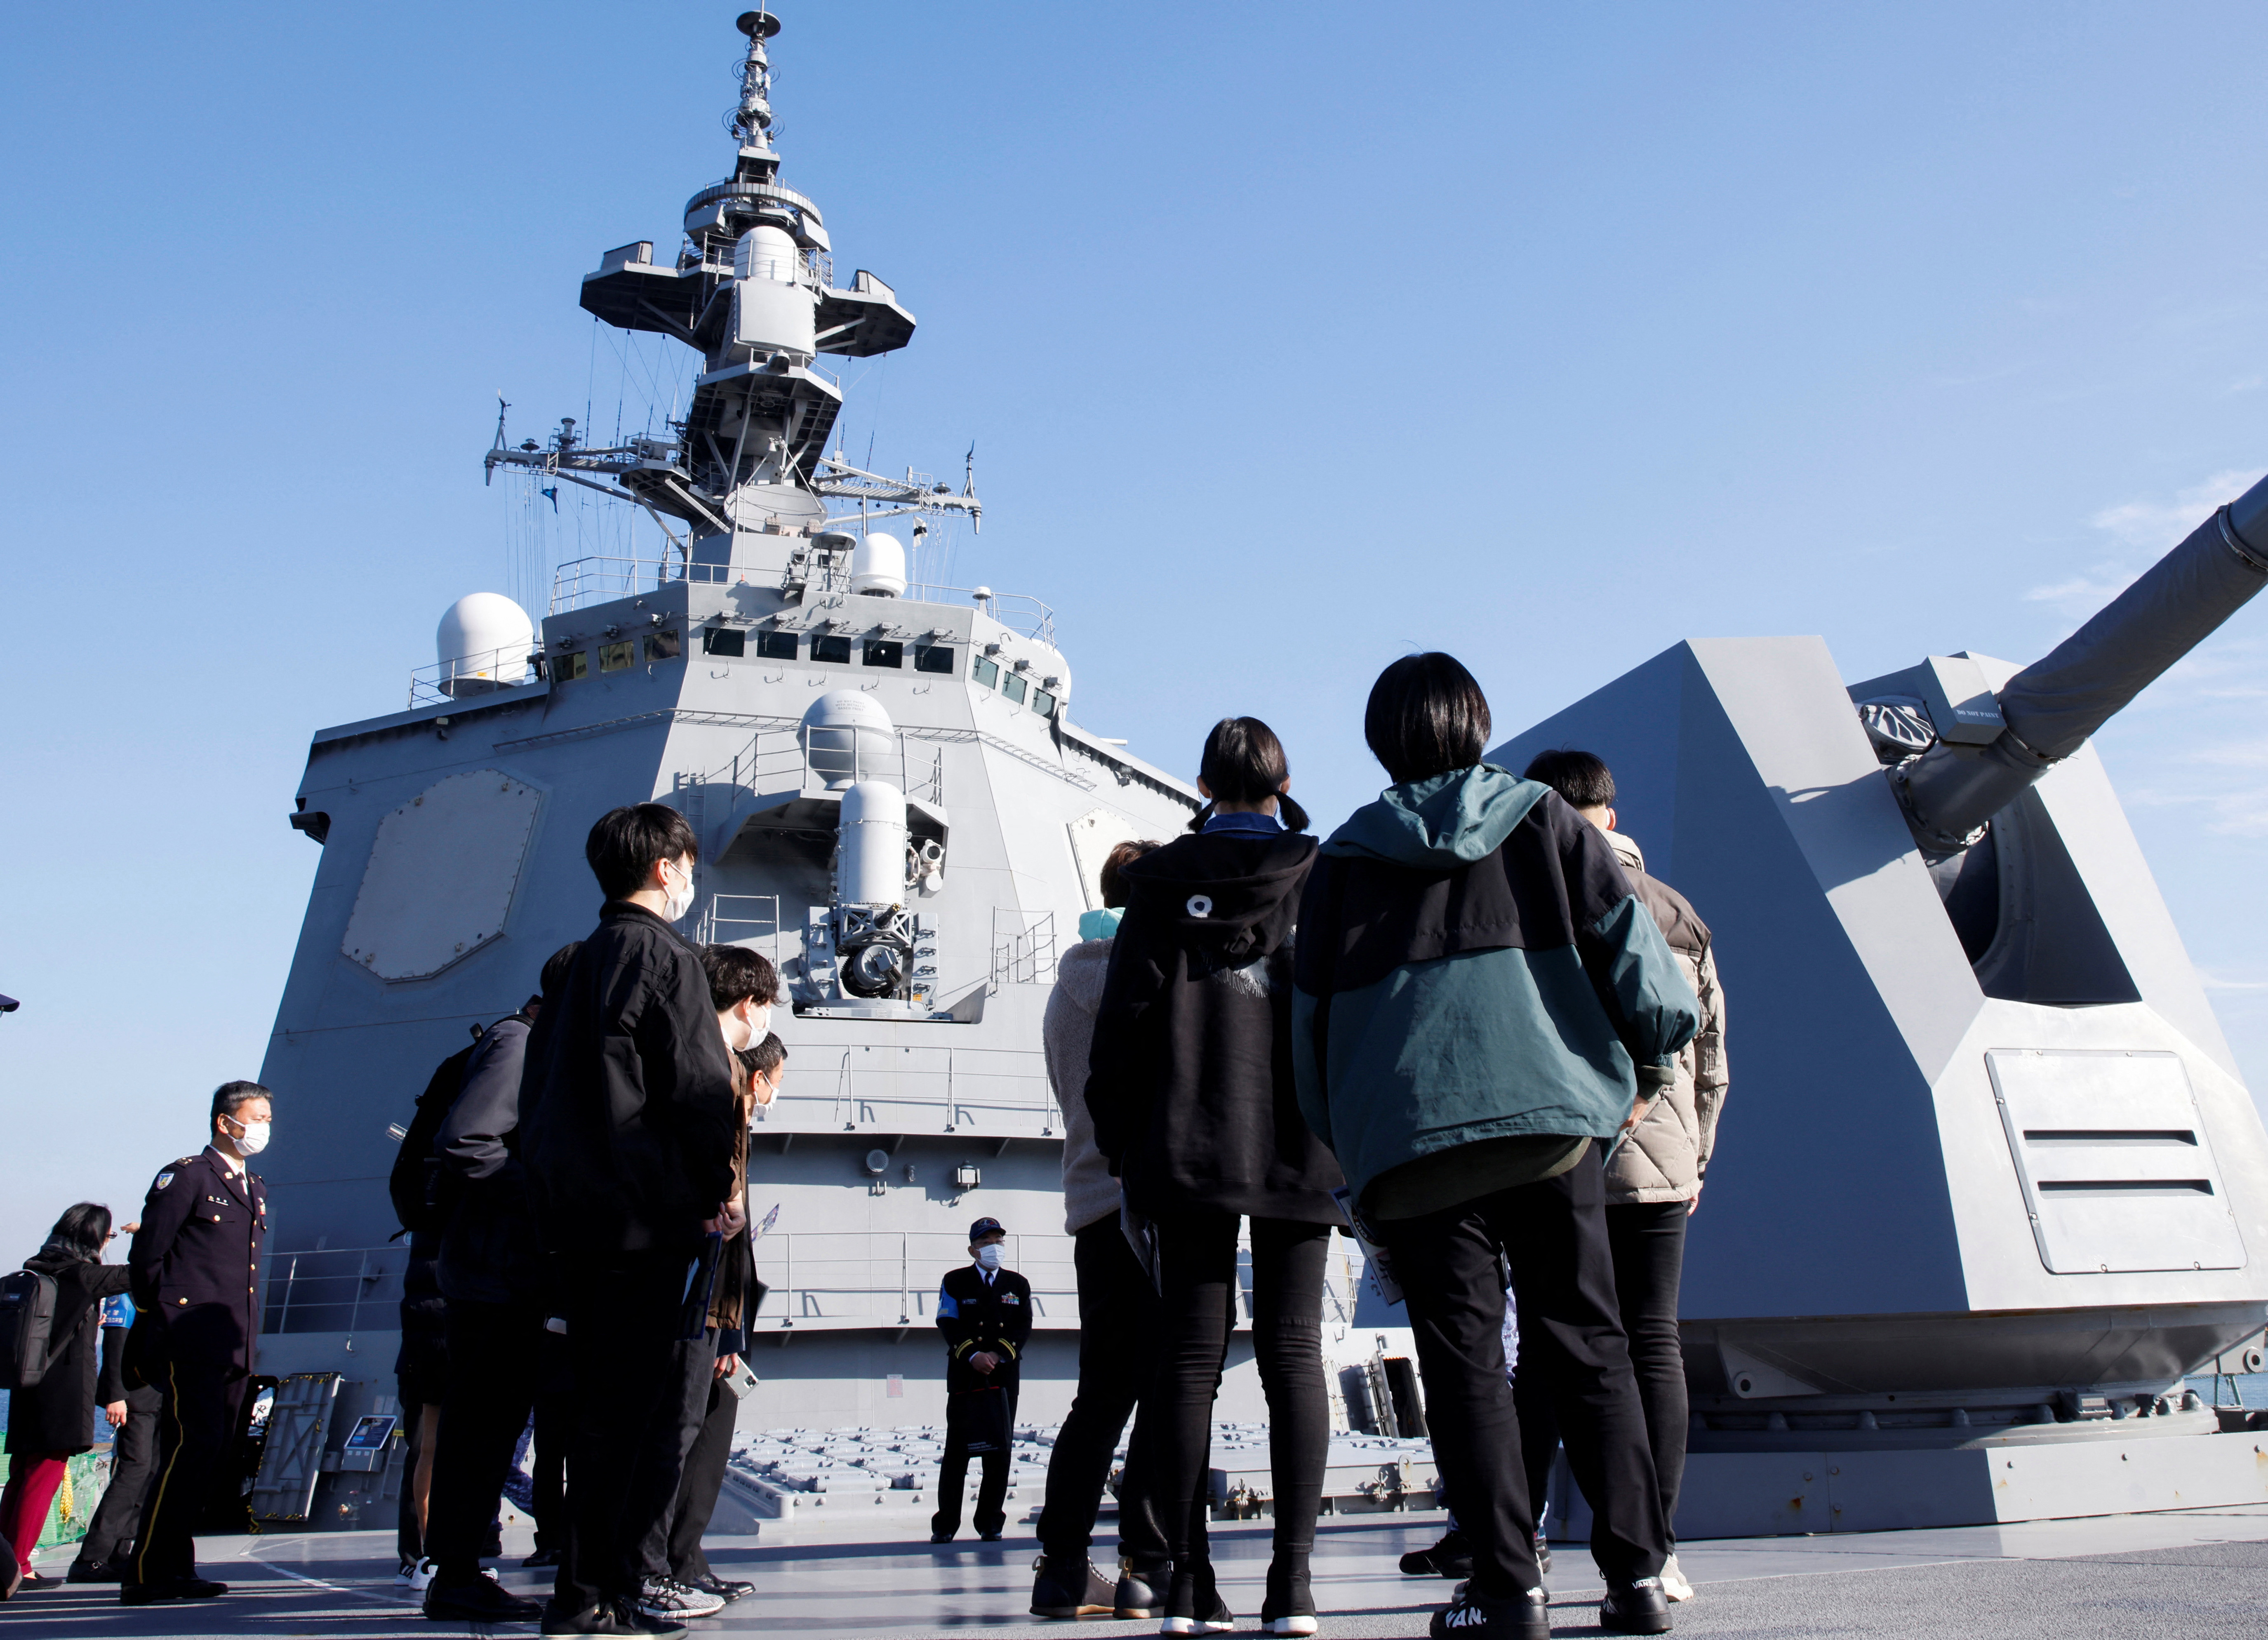 Participants look around Japan's Maritime Self-Defense Force's vessel at a recruiting event in Yokosuka